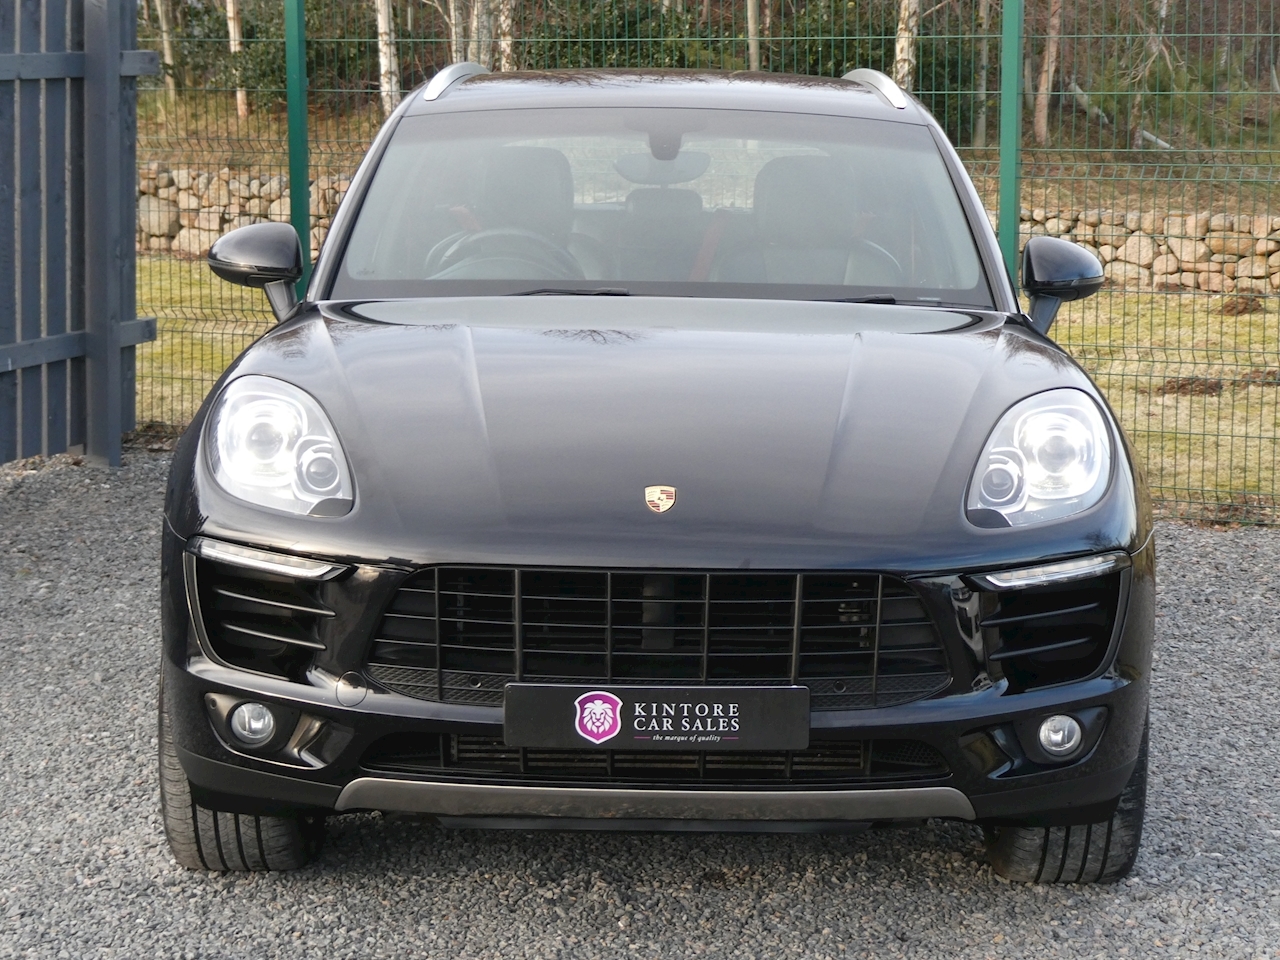 Macan 3.0 TD V6 S 4WD, PDK 3.0 5dr SUV Automatic Diesel